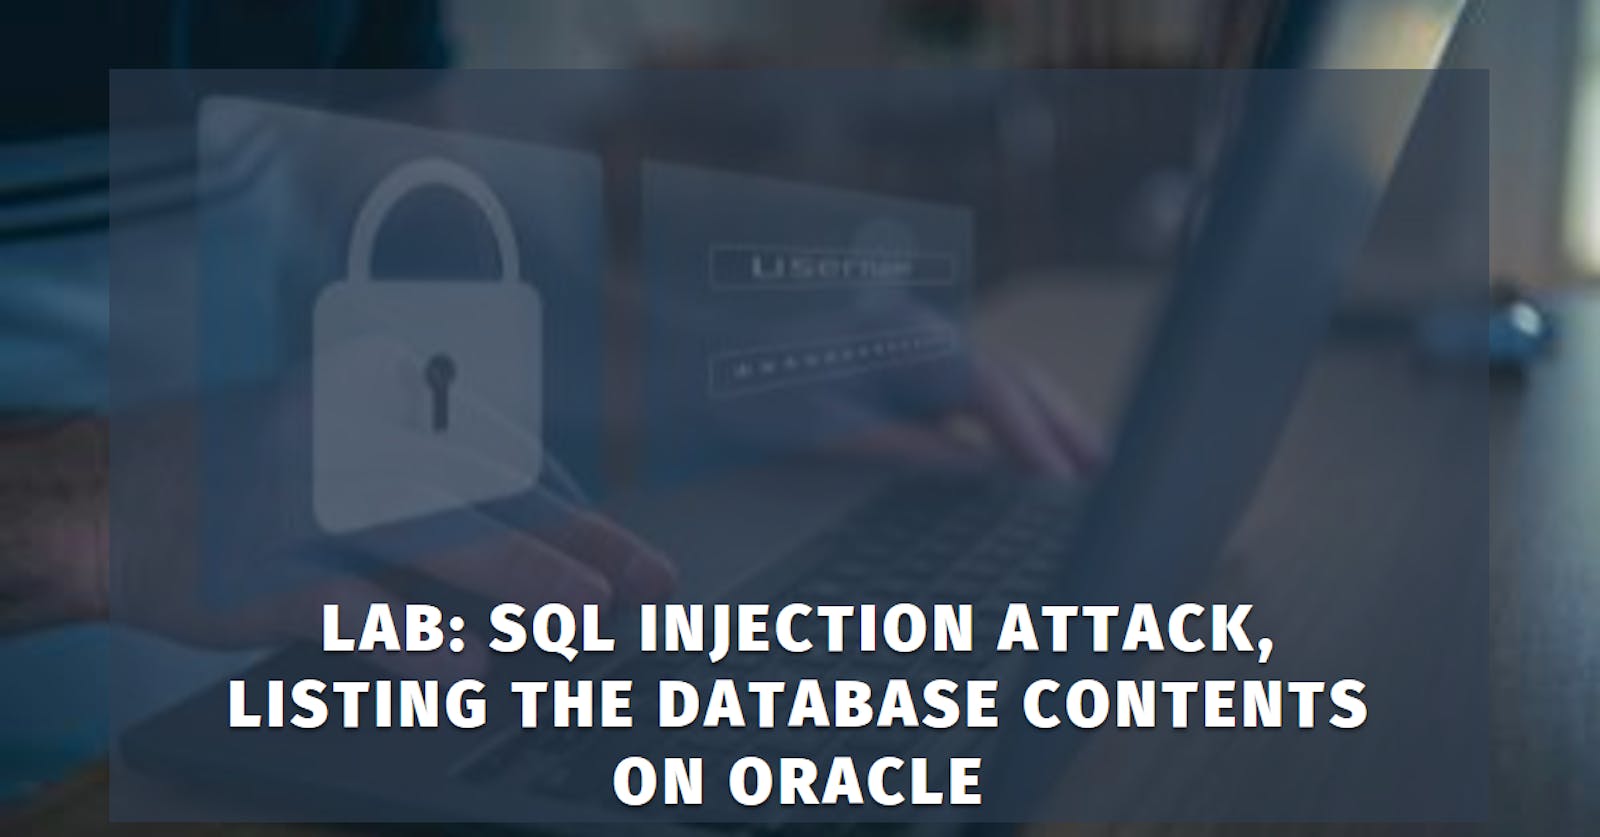 Lab: SQL injection attack, listing the database contents on Oracle